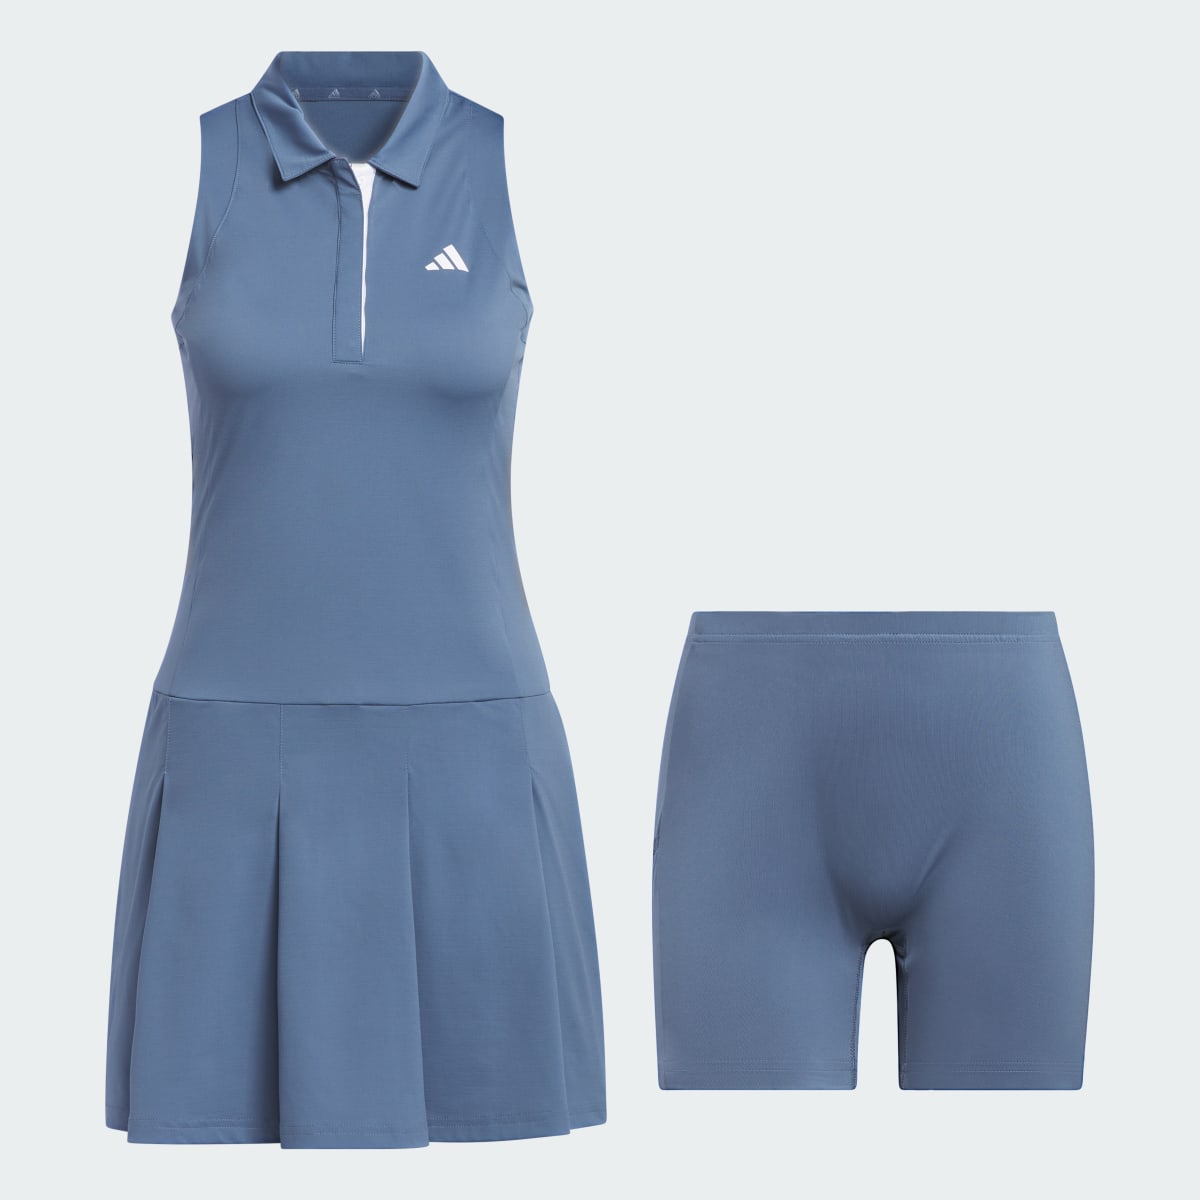 Adidas Women's Ultimate365 Tour Pleated Dress. 5